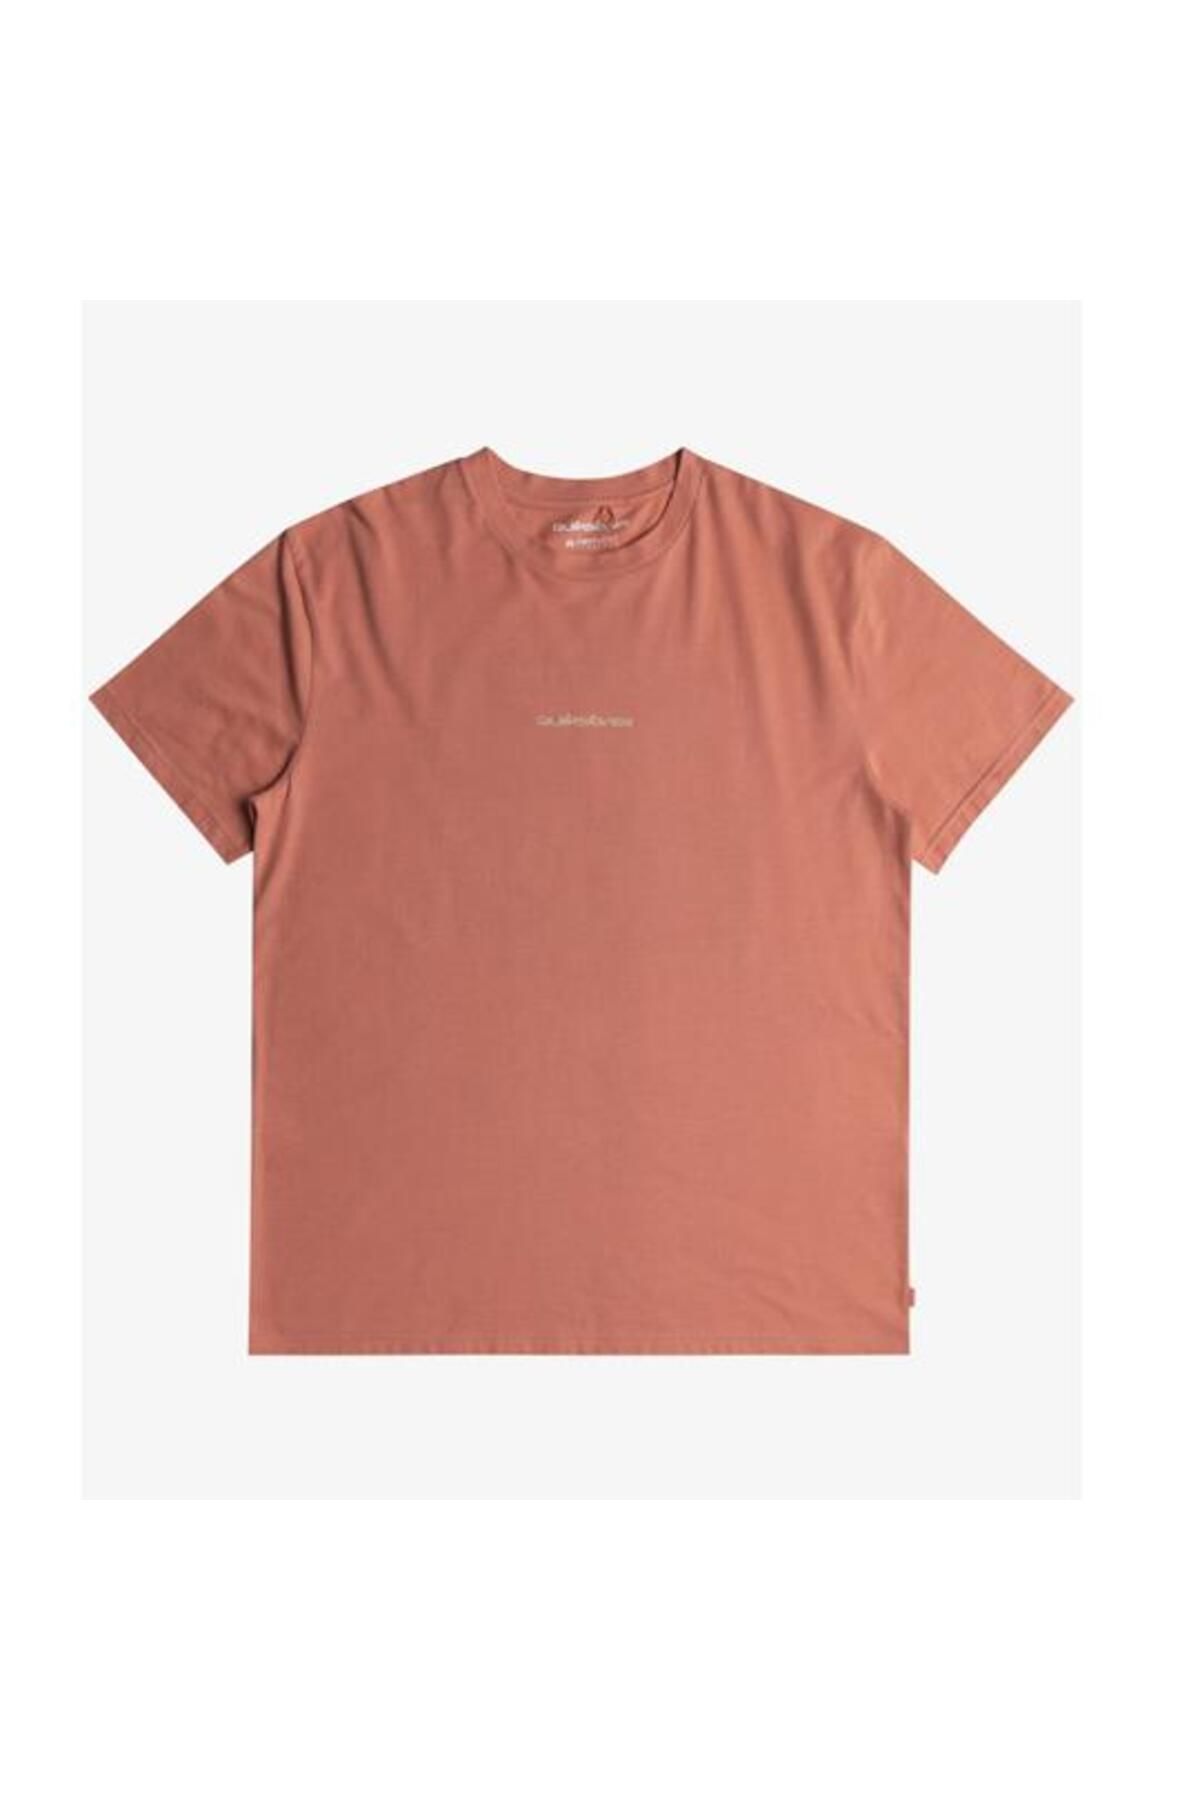 Quiksilver PEACE PHASE SS ERKEK T-SHIRT TEE-CANYON CLAY-MJR0-